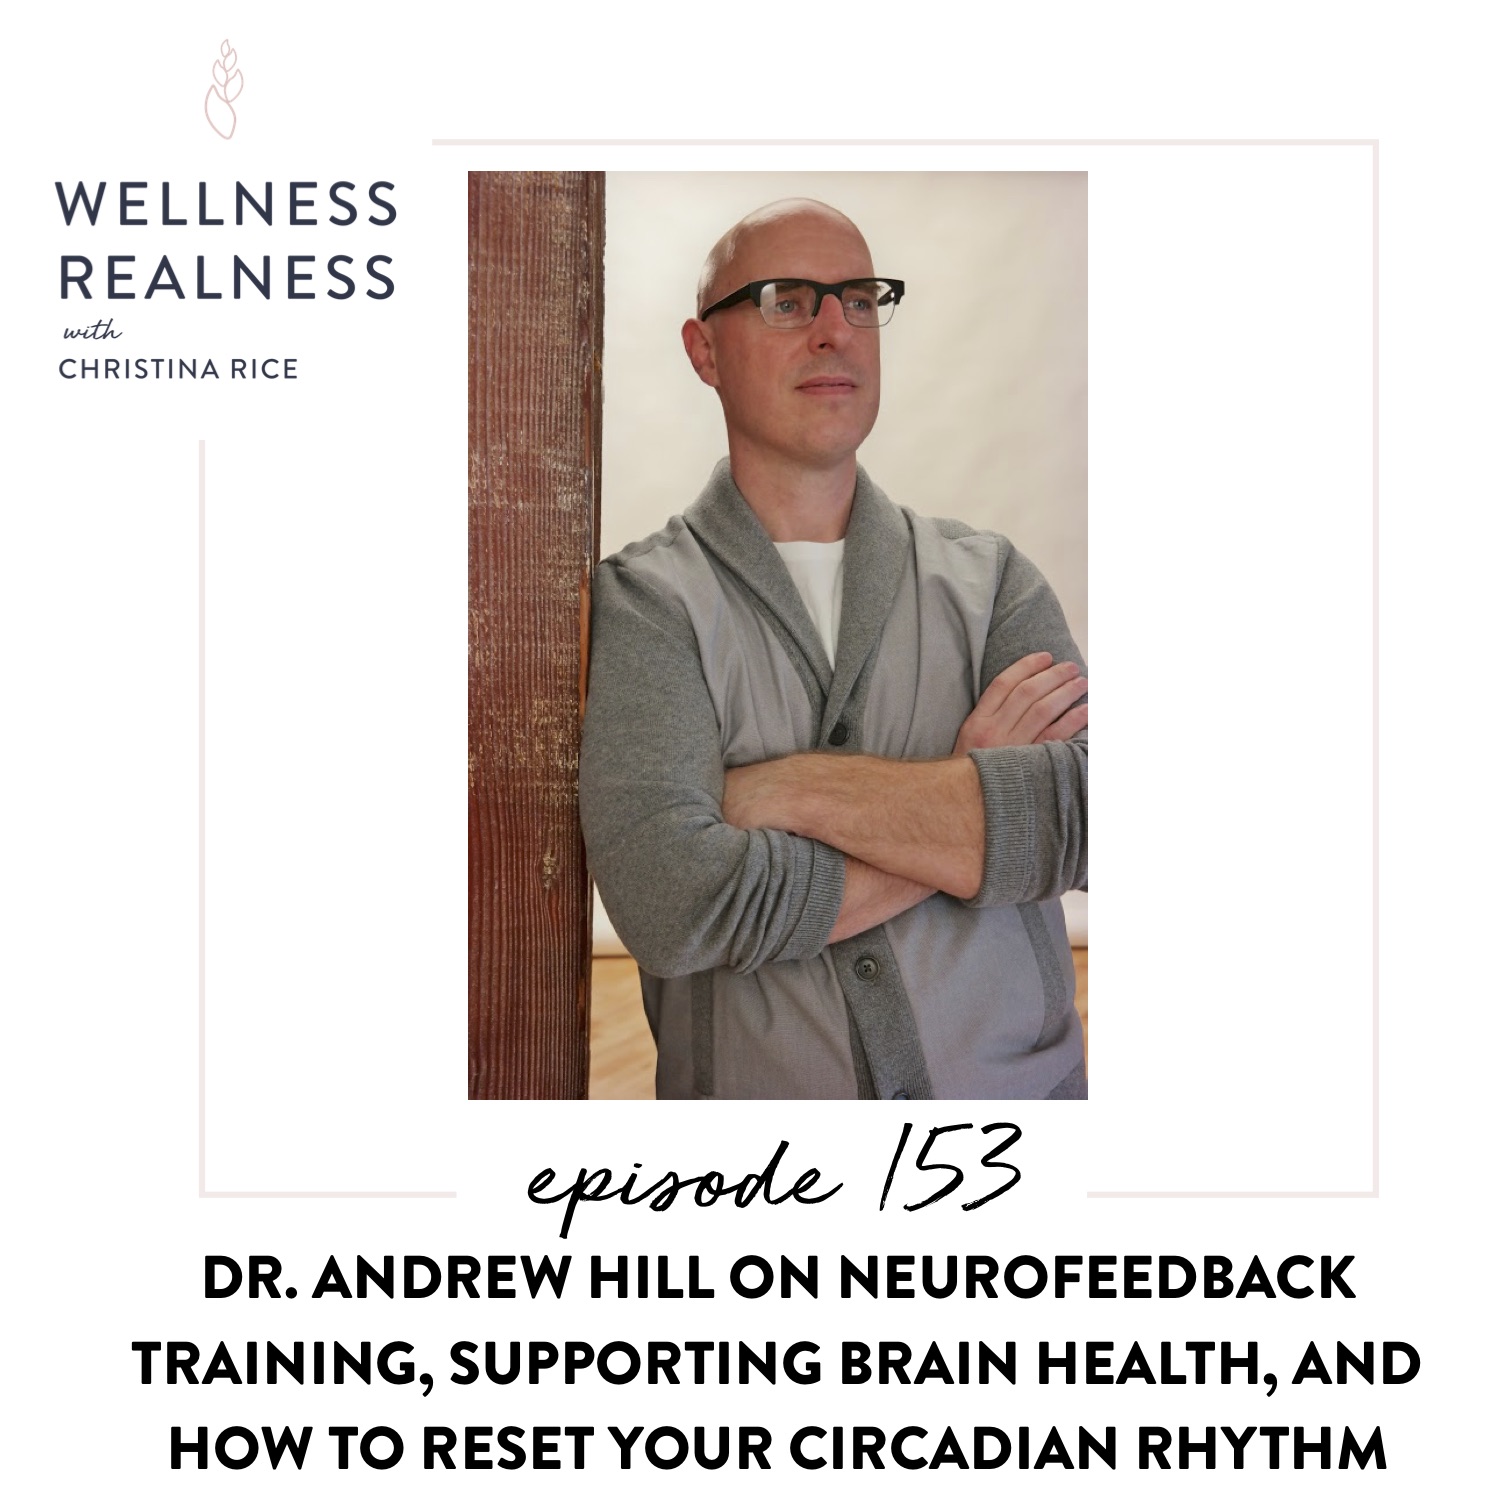 153: Dr. Andrew Hill on Neurofeedback Training, Supporting Brain Health, and How to Reset Your Circadian Rhythm